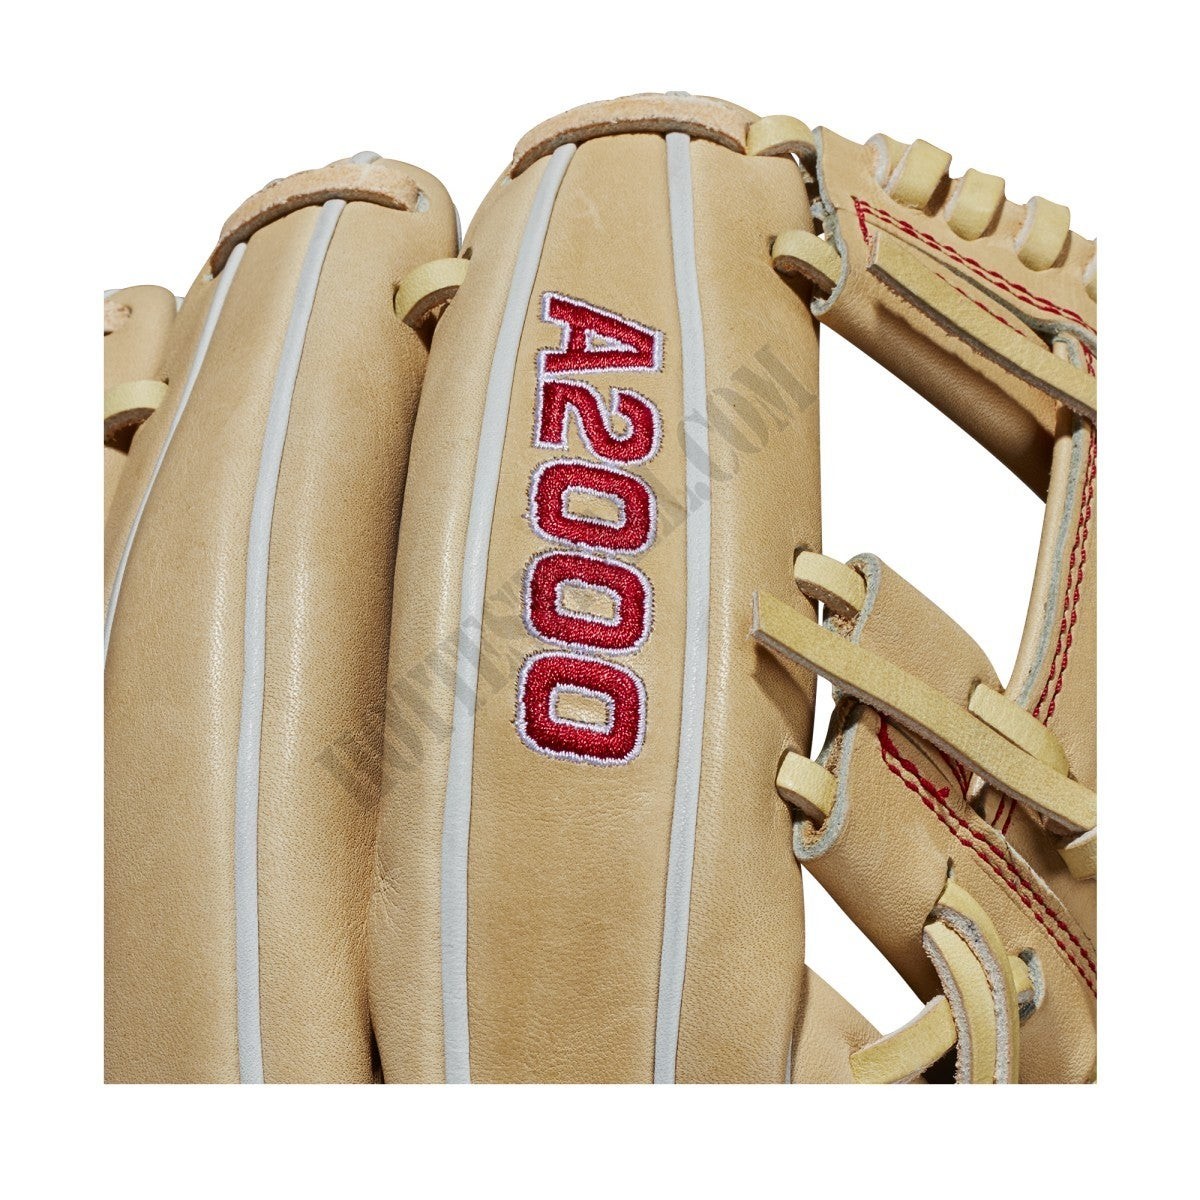 2021 A2000 1786 Bronco 11.5" Infield Baseball Glove - Right Hand Throw ● Wilson Promotions - -6